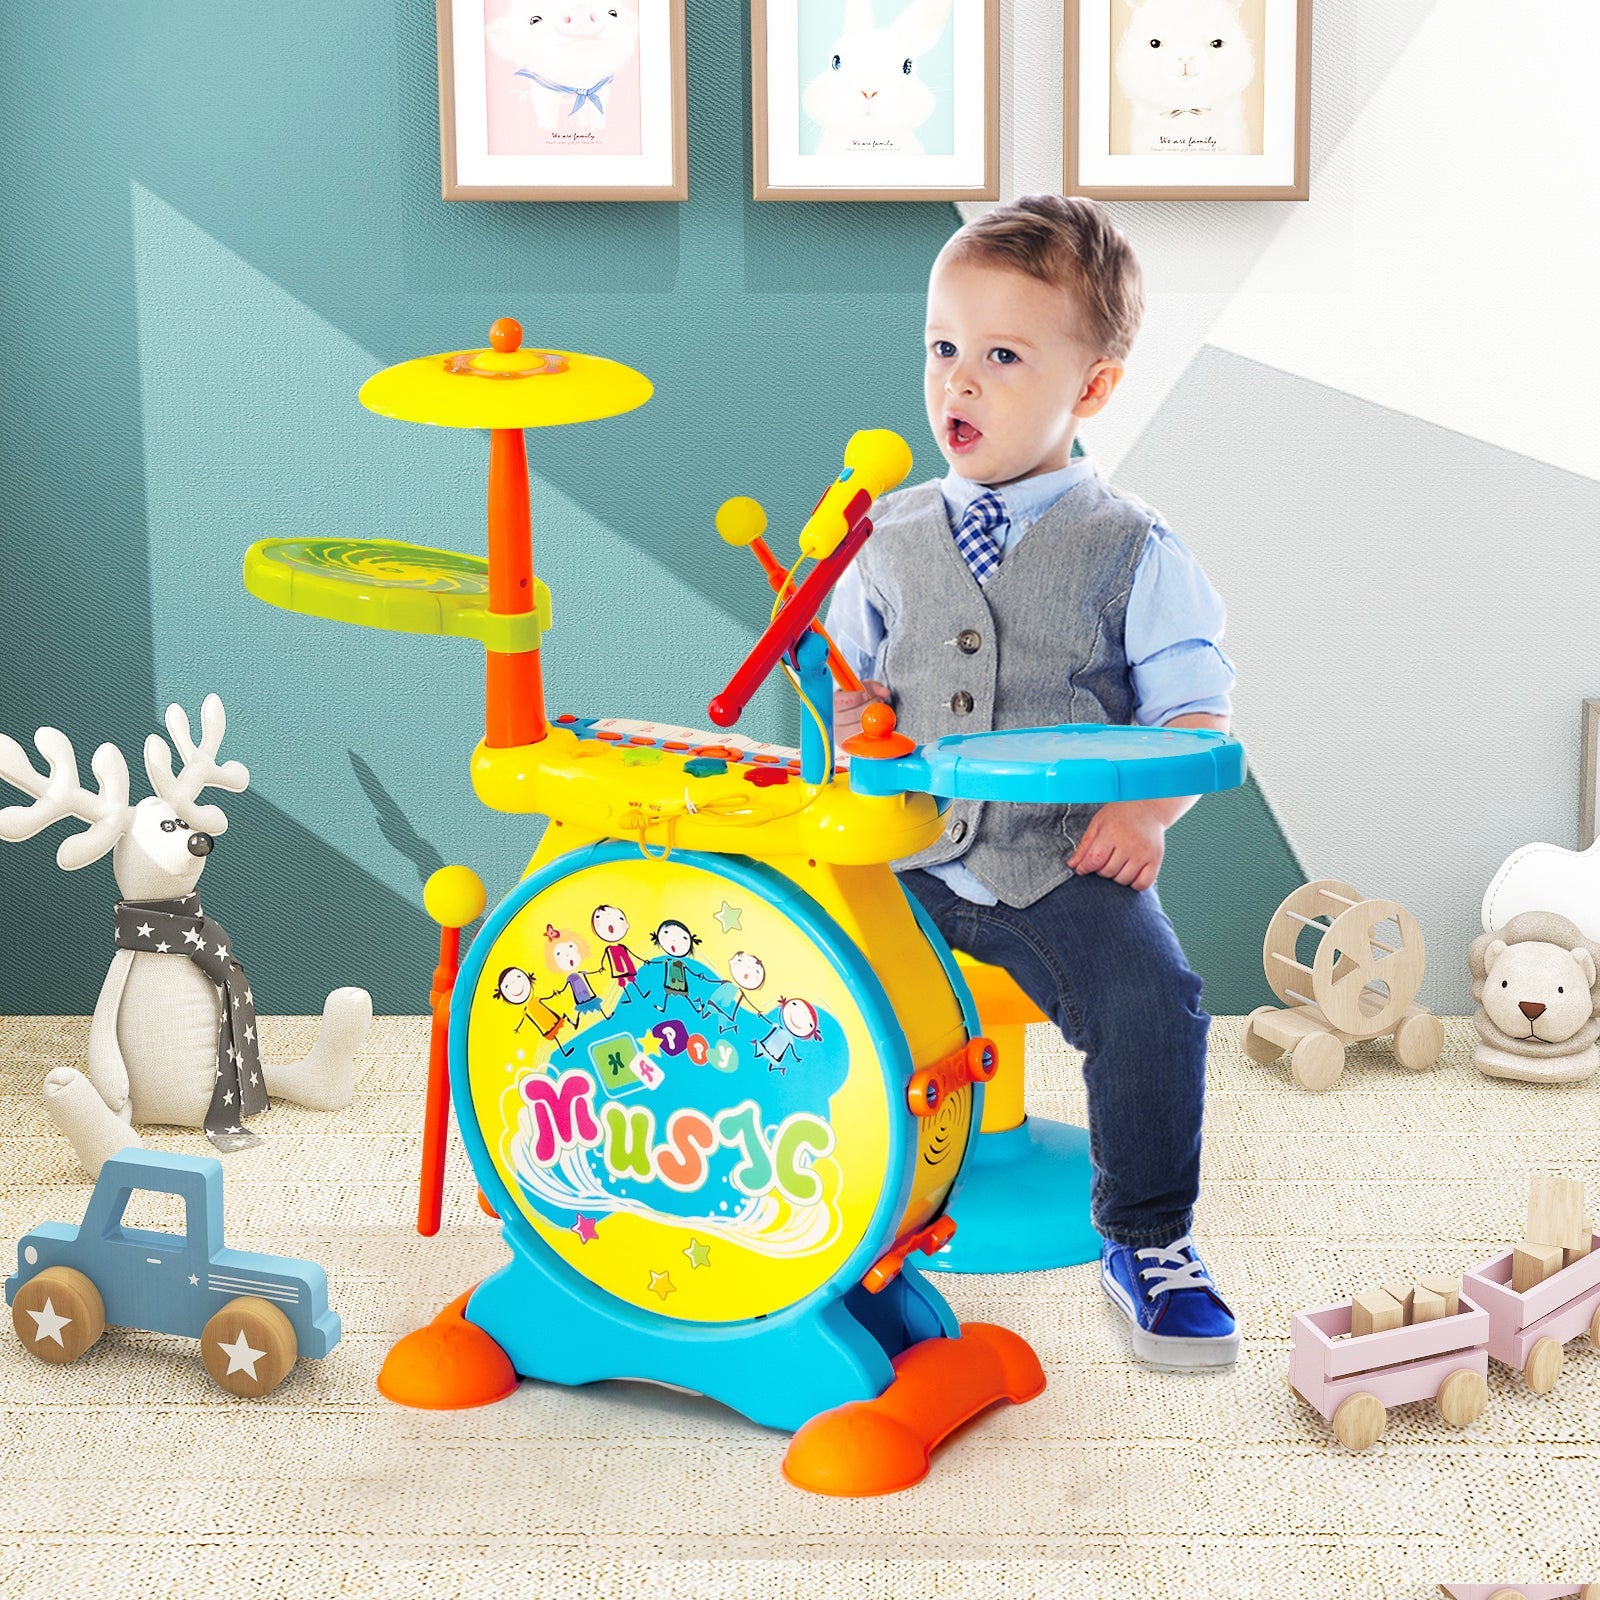 Children's Electronic Drum Kit - 2-in-1 Toy with Keyboard & Microphone